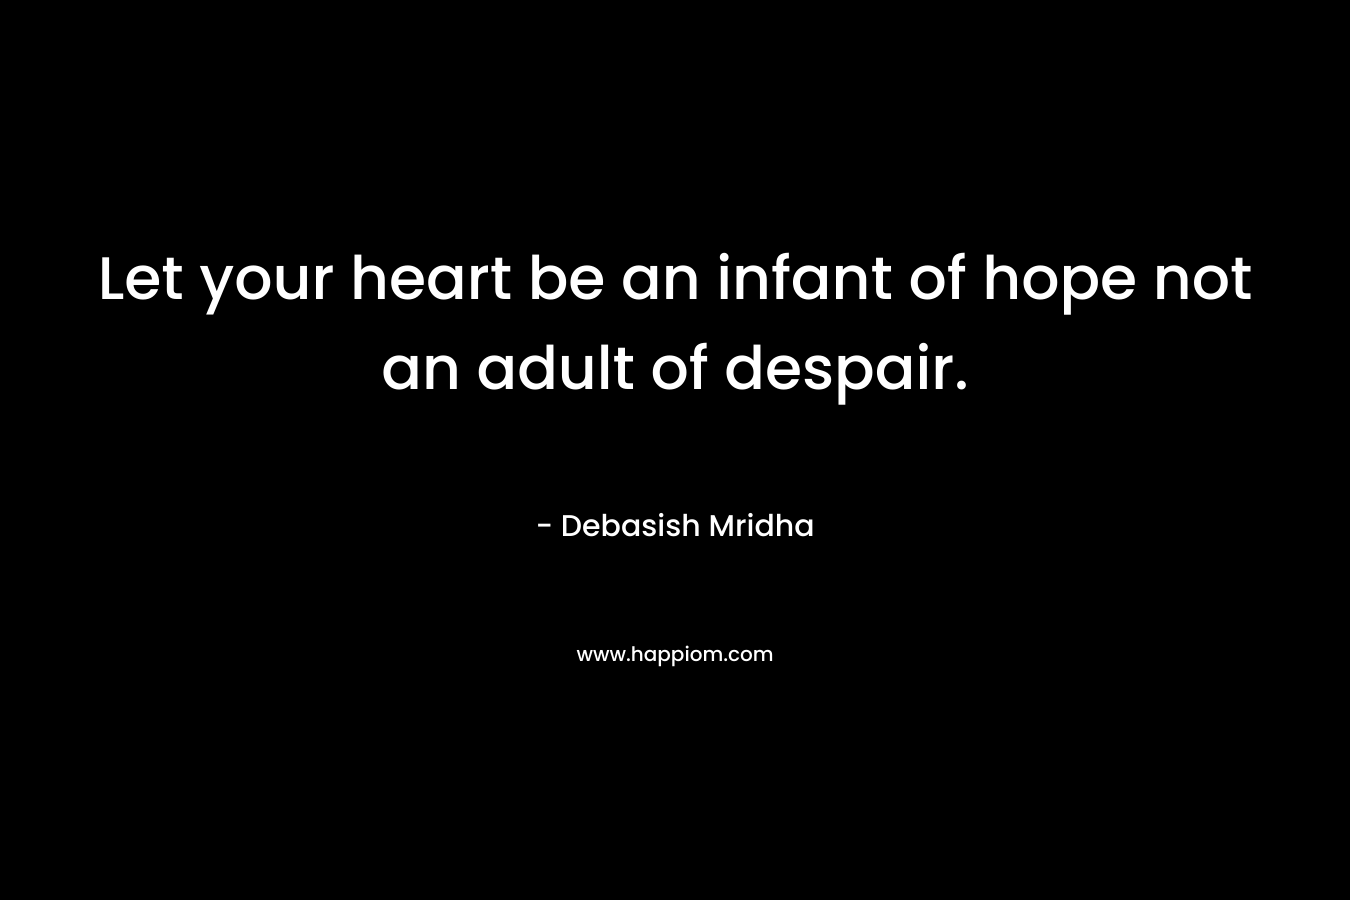 Let your heart be an infant of hope not an adult of despair. – Debasish Mridha